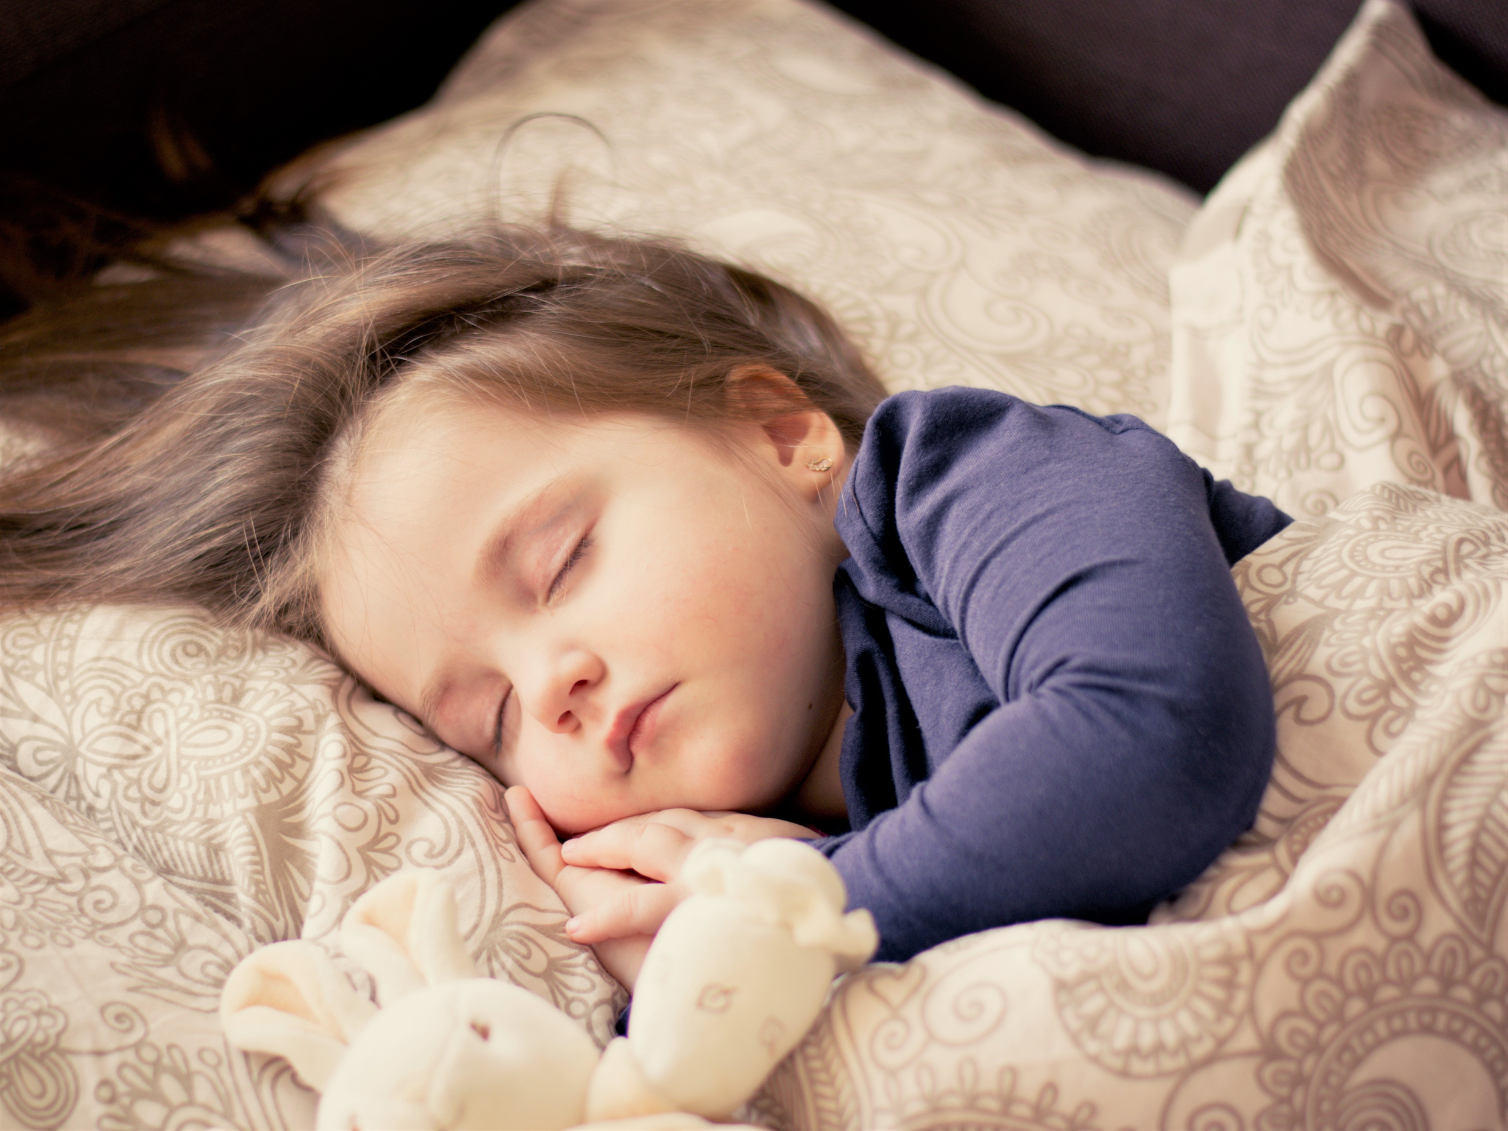 Newborn Sleep Solutions: How to Get Your Baby to Sleep Through the Night